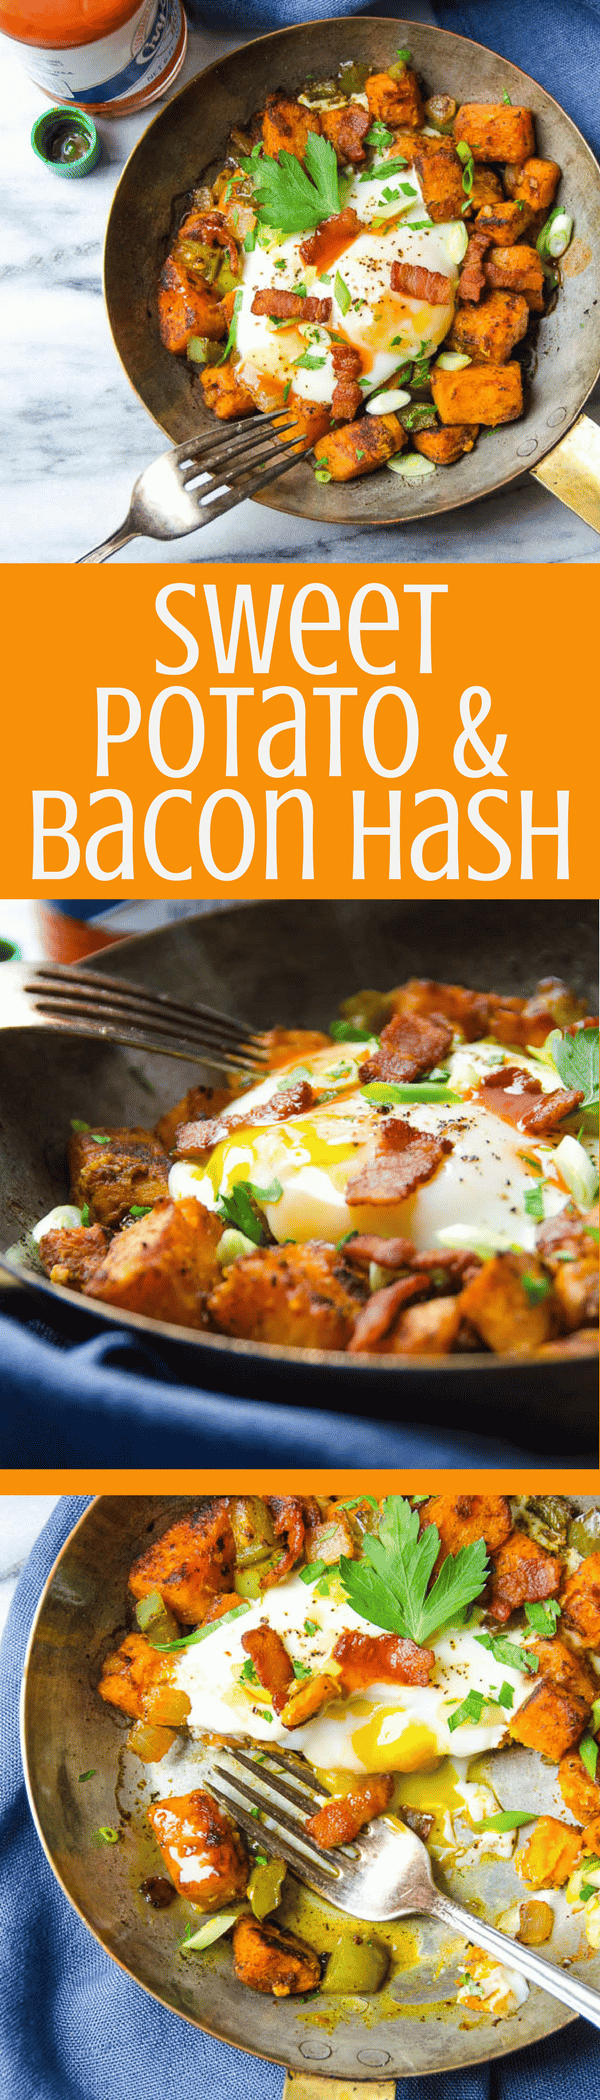 Sweet Potato and Bacon Hash is an easy diner-style skillet breakfast. Great for a lazy Sunday brunch or breakfast for dinner! #breakfast #brunch #hash #sweetpotatohash #bacon #eggs #hotsauce #skilletbreakfast #skillethash #homemadehash #weekendbreakfast